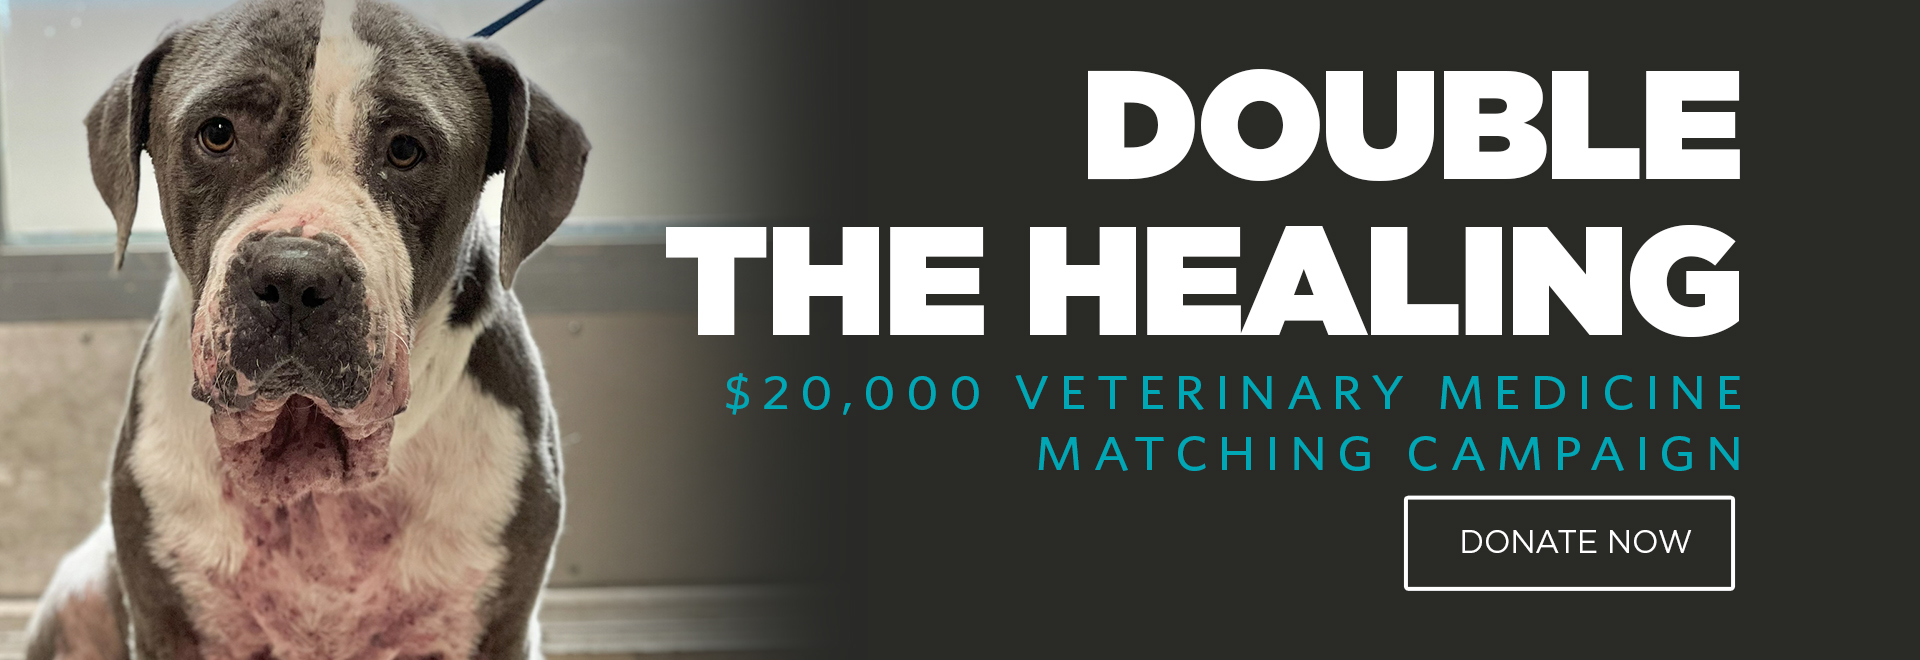 Double the Healing | $20,000 Veterinary Medicine Matching Campaign | Donate Now